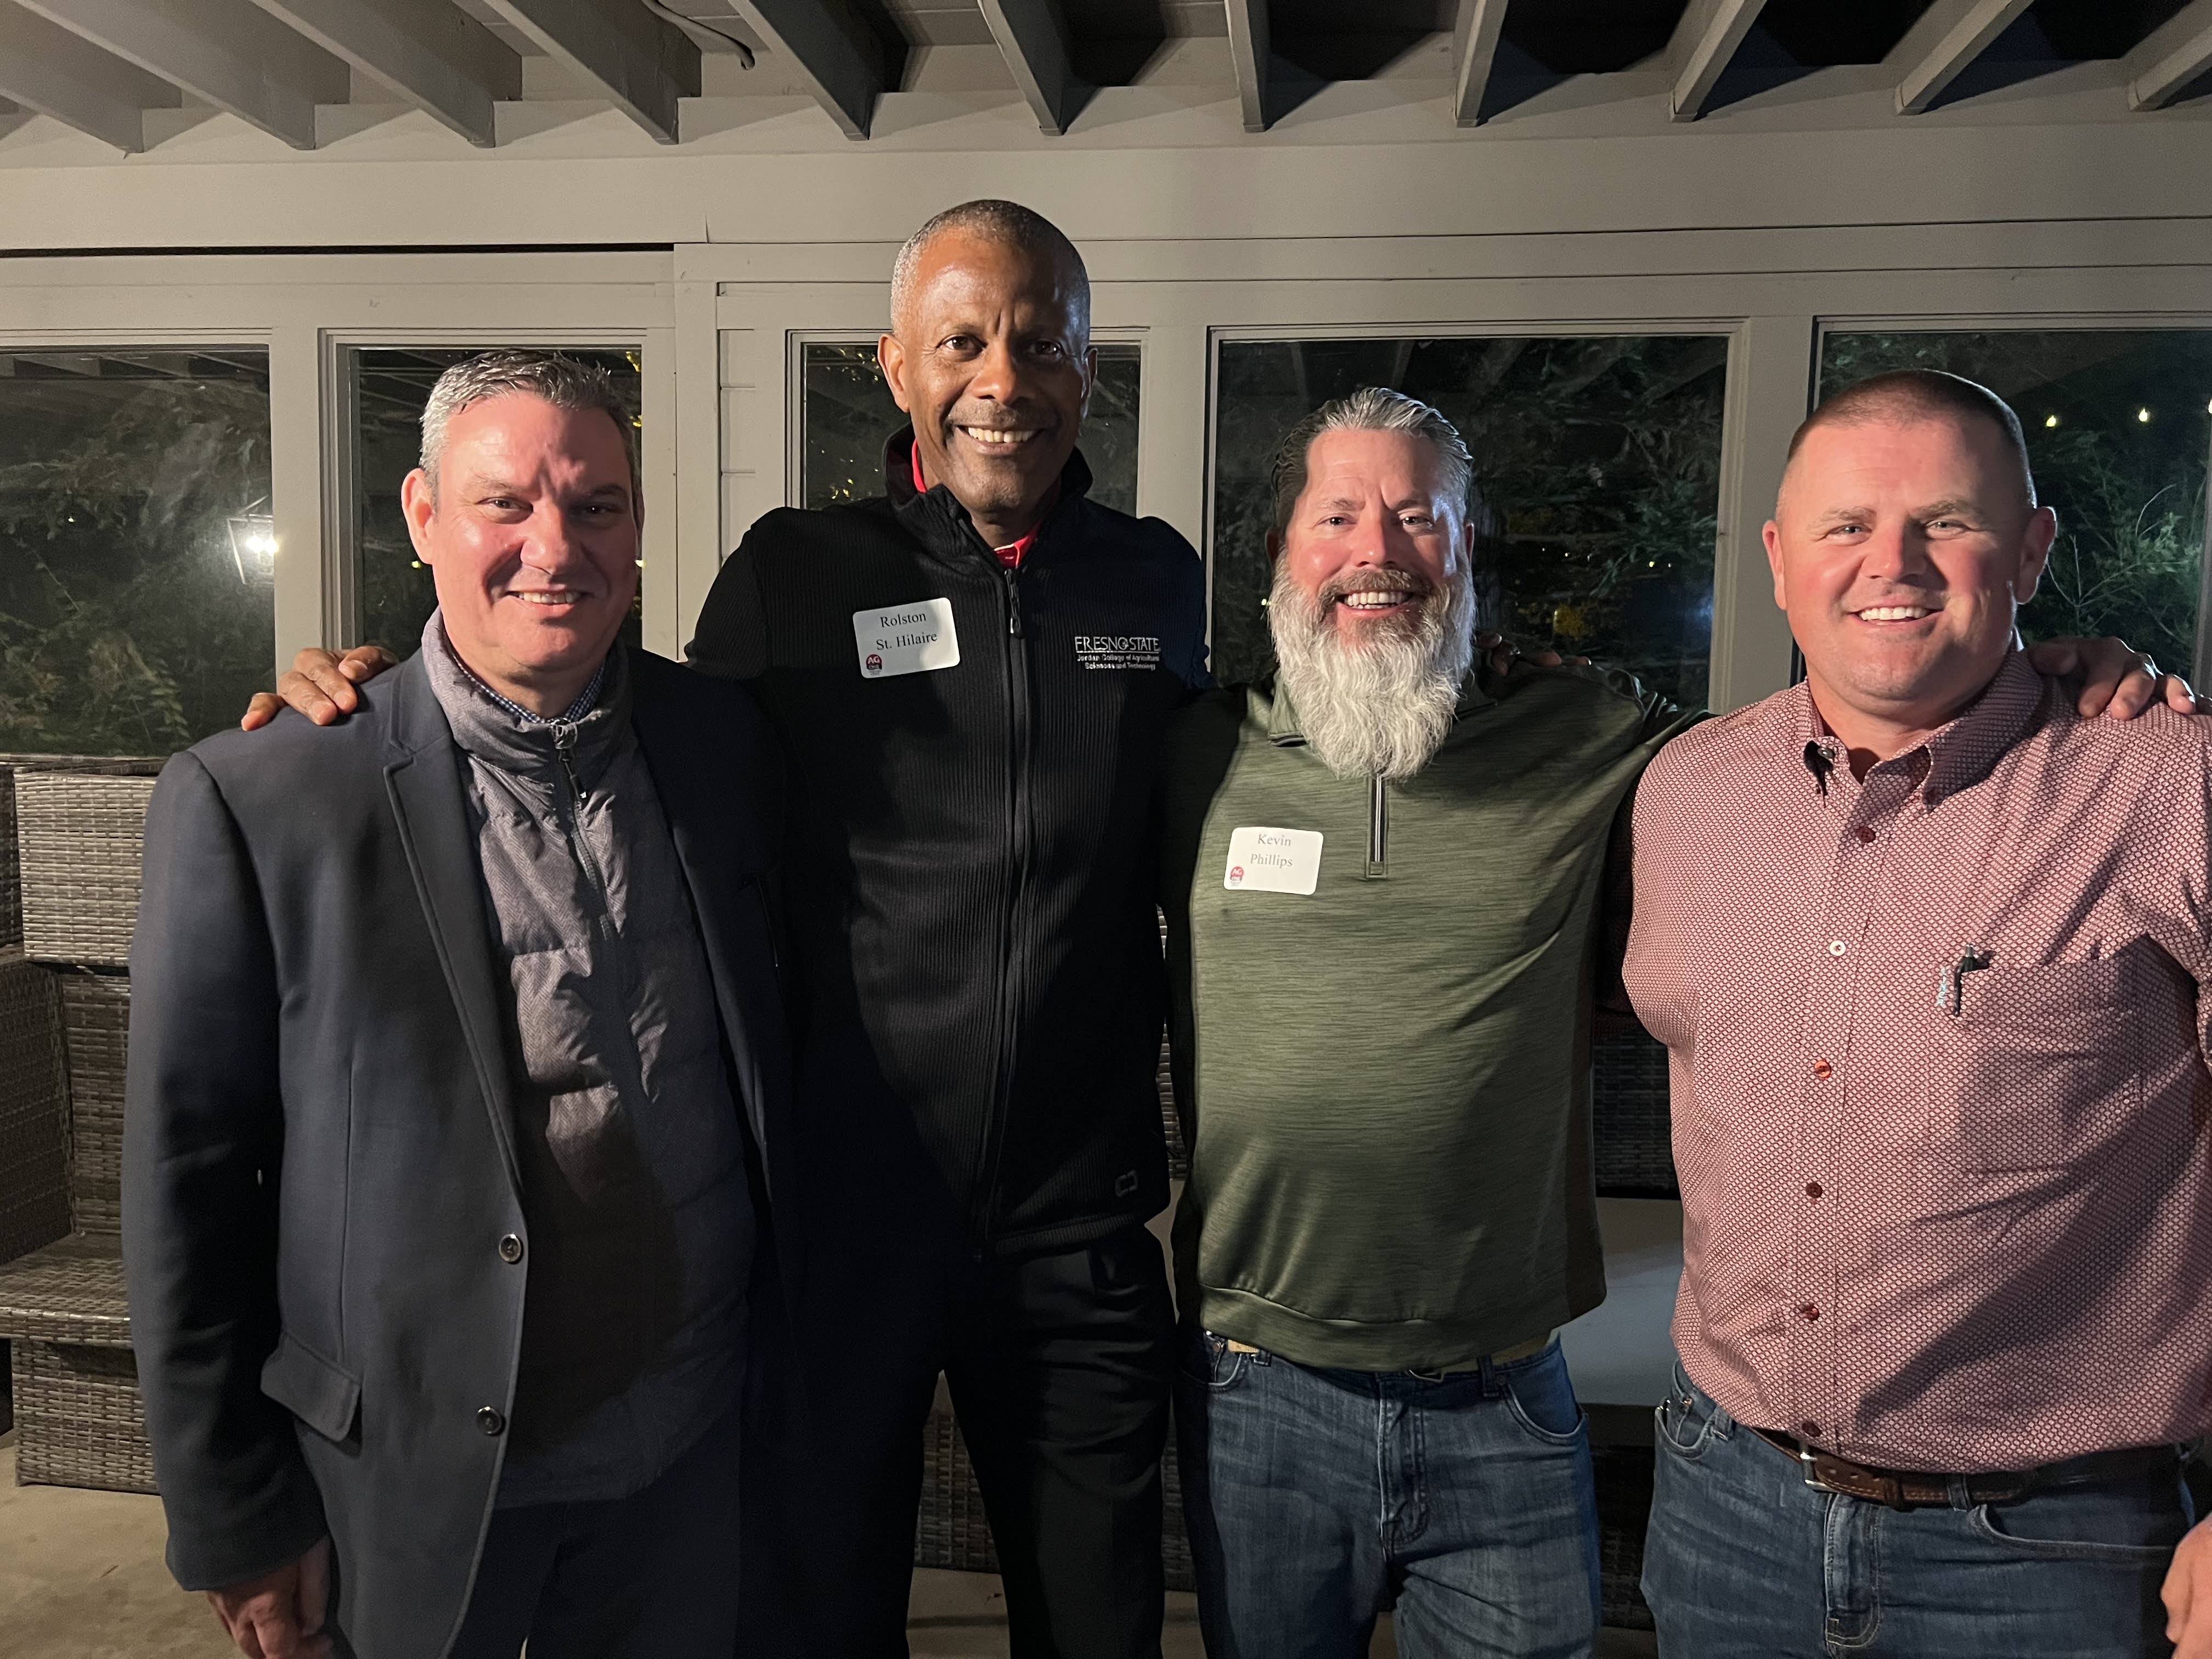 L-R: Dr. Stylianos Logothetis; Dean Rolston St. Hilaire; Kevin Phillips, Michael David Winery; Tyler Blagg, Ag One director and event chair